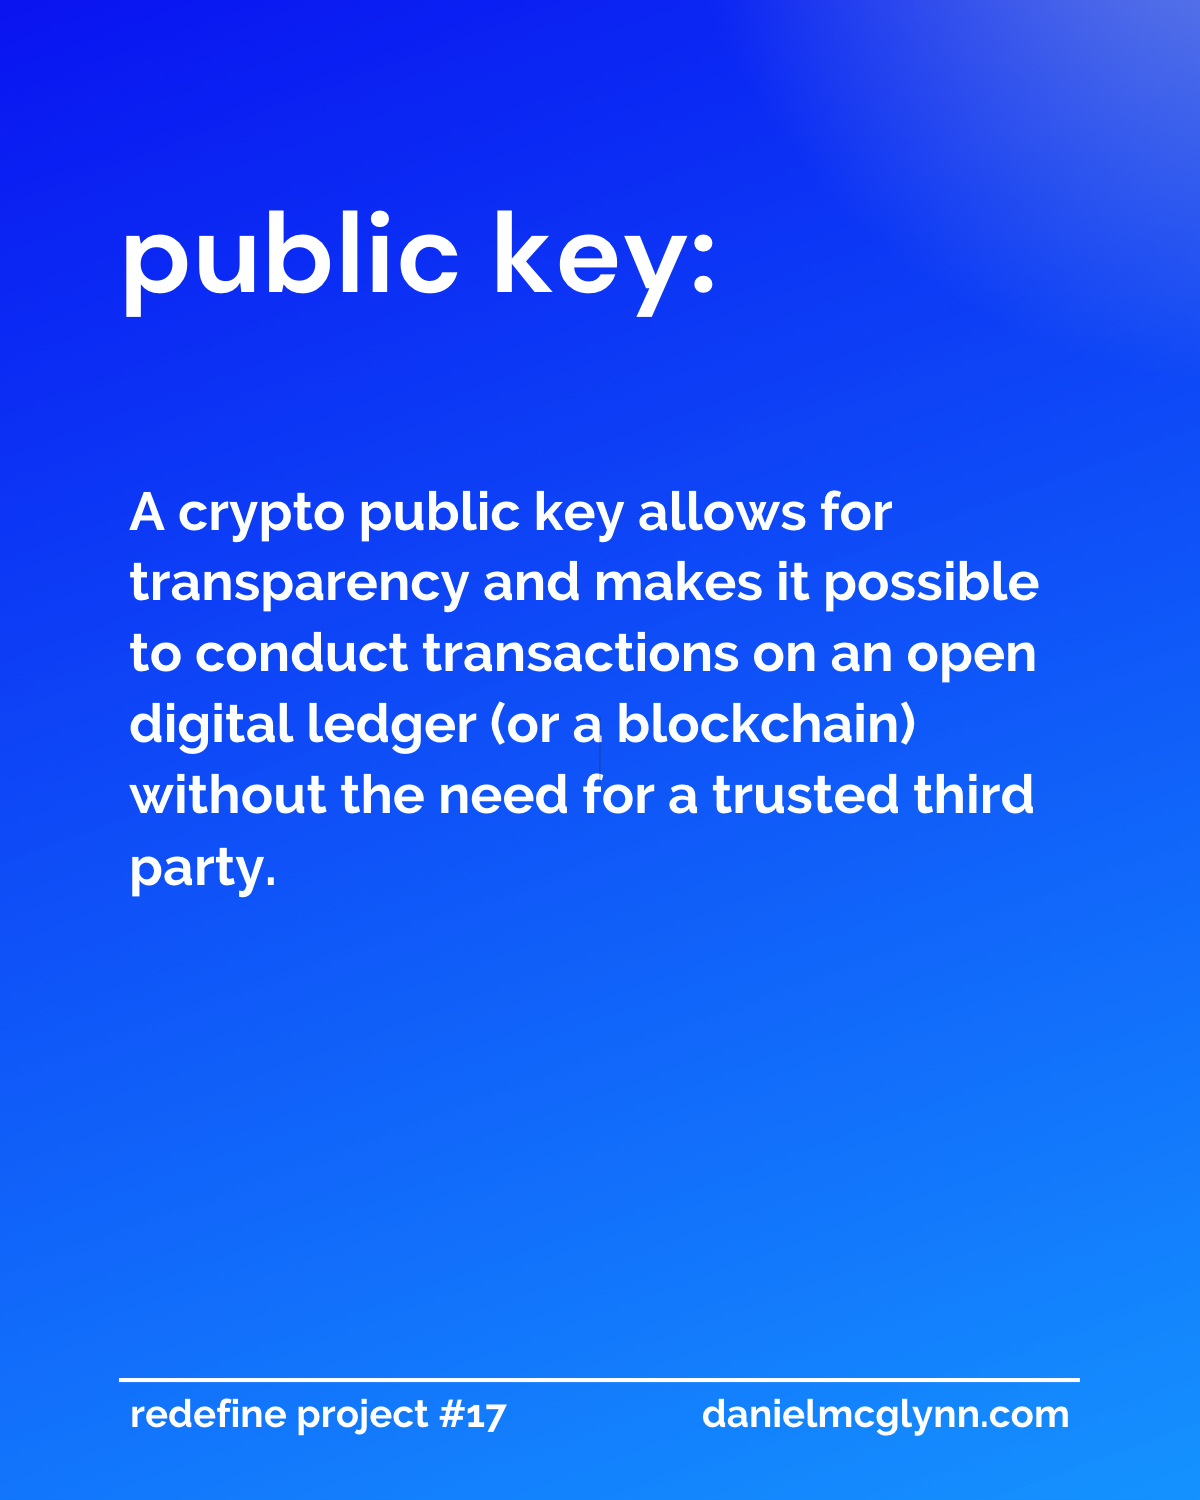 A crypto public key allows for transparency and makes it possible to conduct transactions on an open digital ledger (or a blockchain) without the need for a trusted third party.